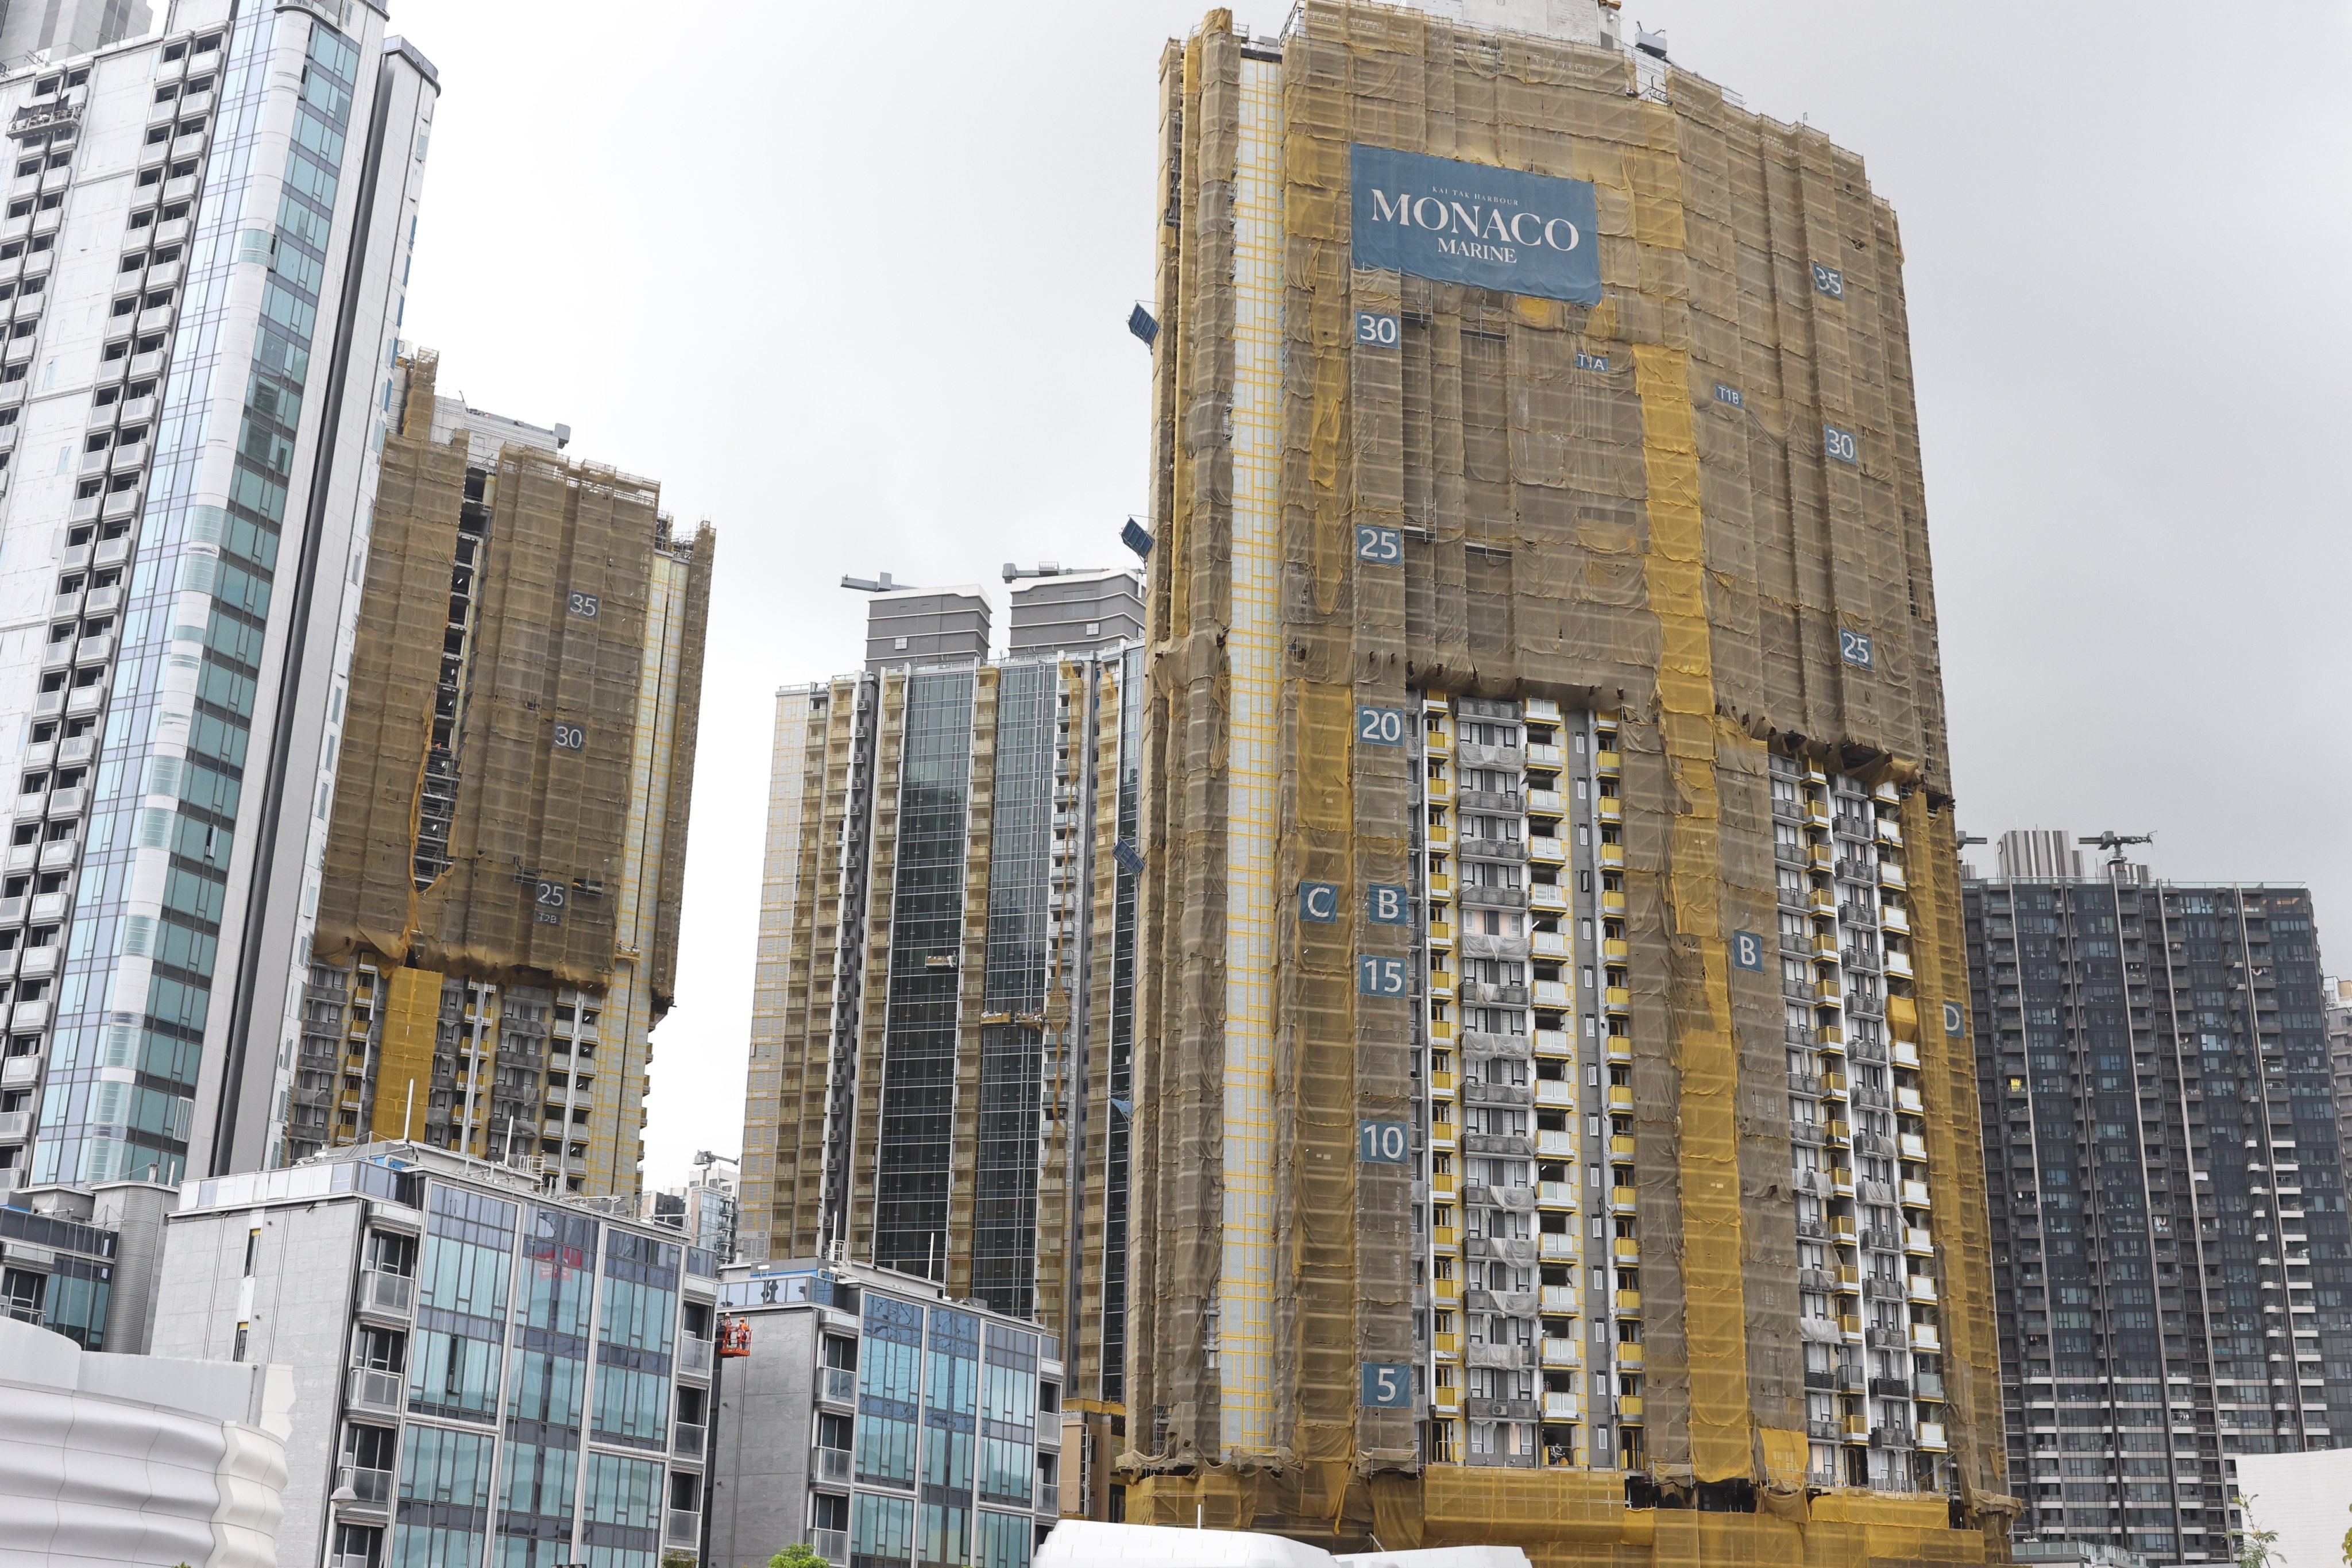 Wheelock Properties’ Monaco Marine residential project is coming up in Kai Tak. Photo: K. Y. Cheng